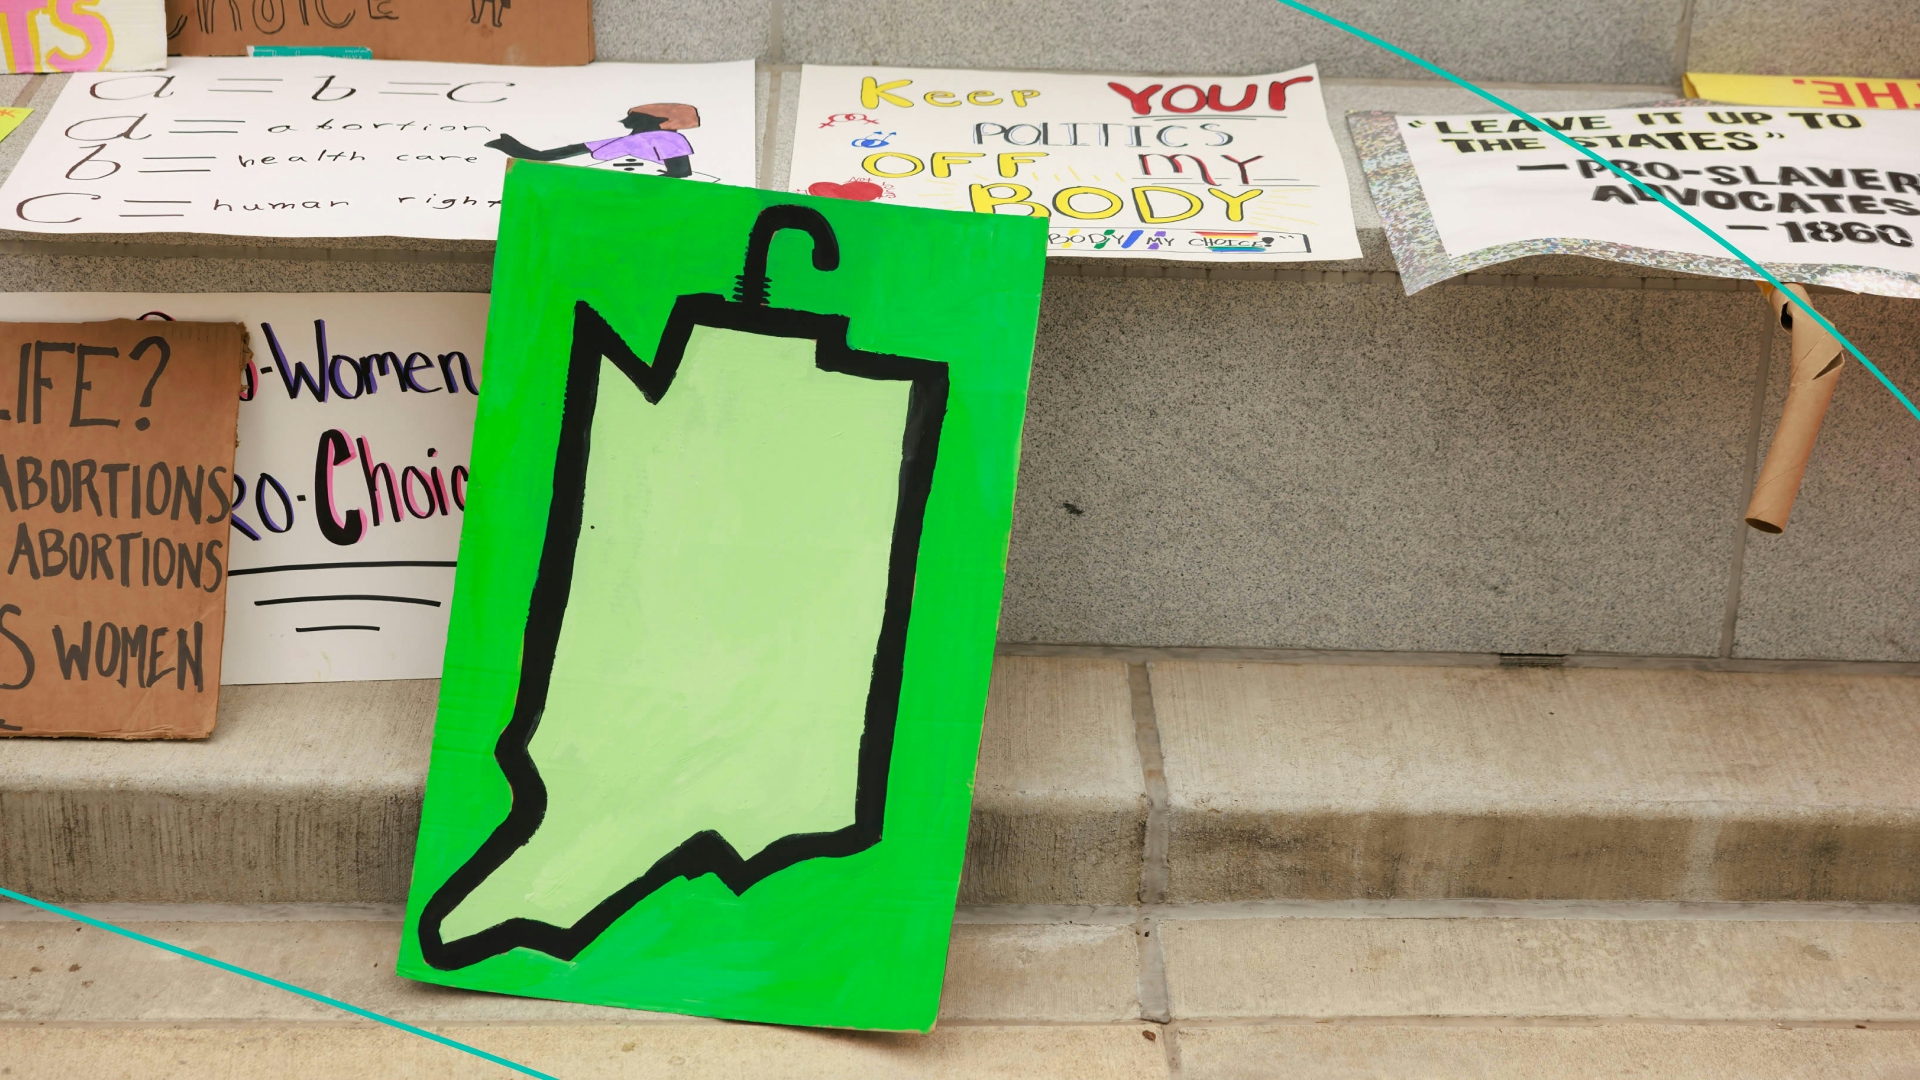 Abortion-rights protesters leave a drawing of the state of Indiana during the demonstration.